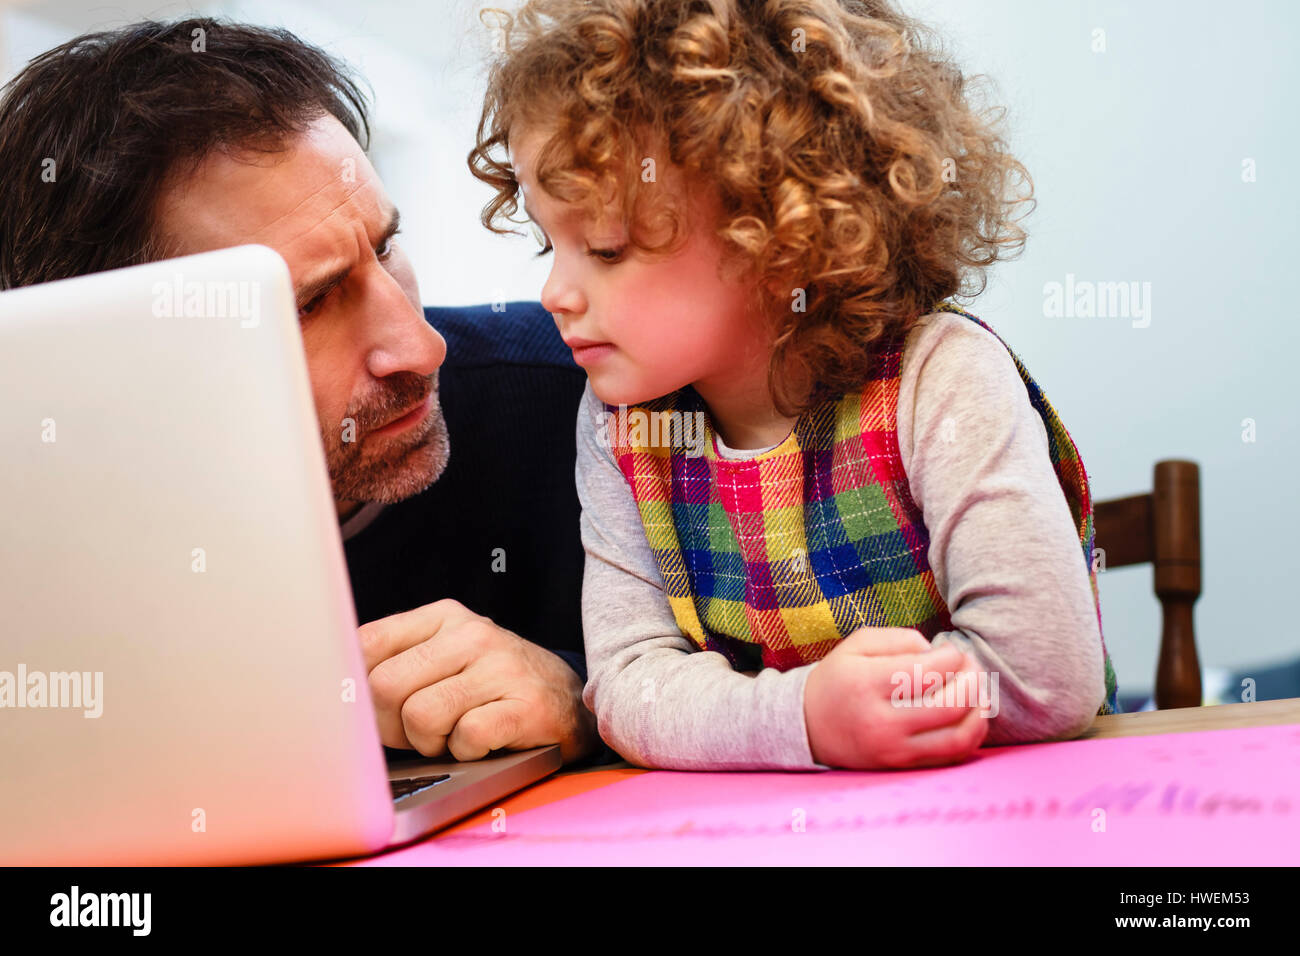 Girl peering at father's laptop at table Stock Photo